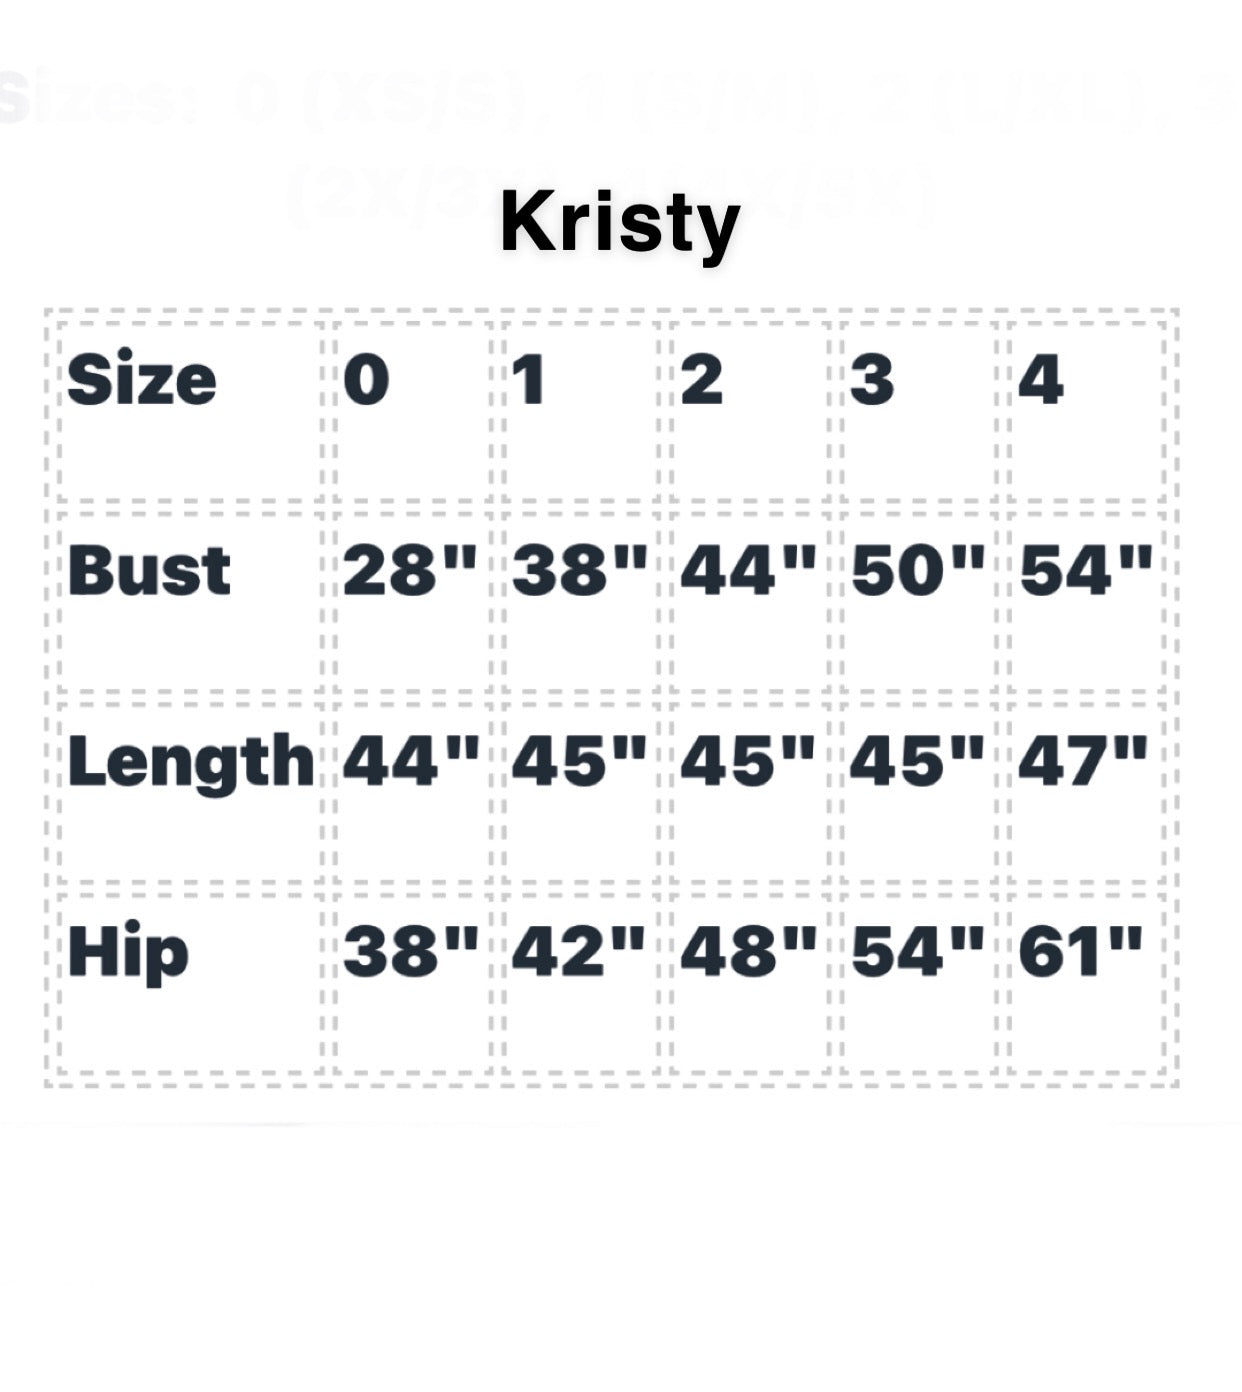 Kristy Dress- Wardrobe Staple with Endless Opportunities to Layer